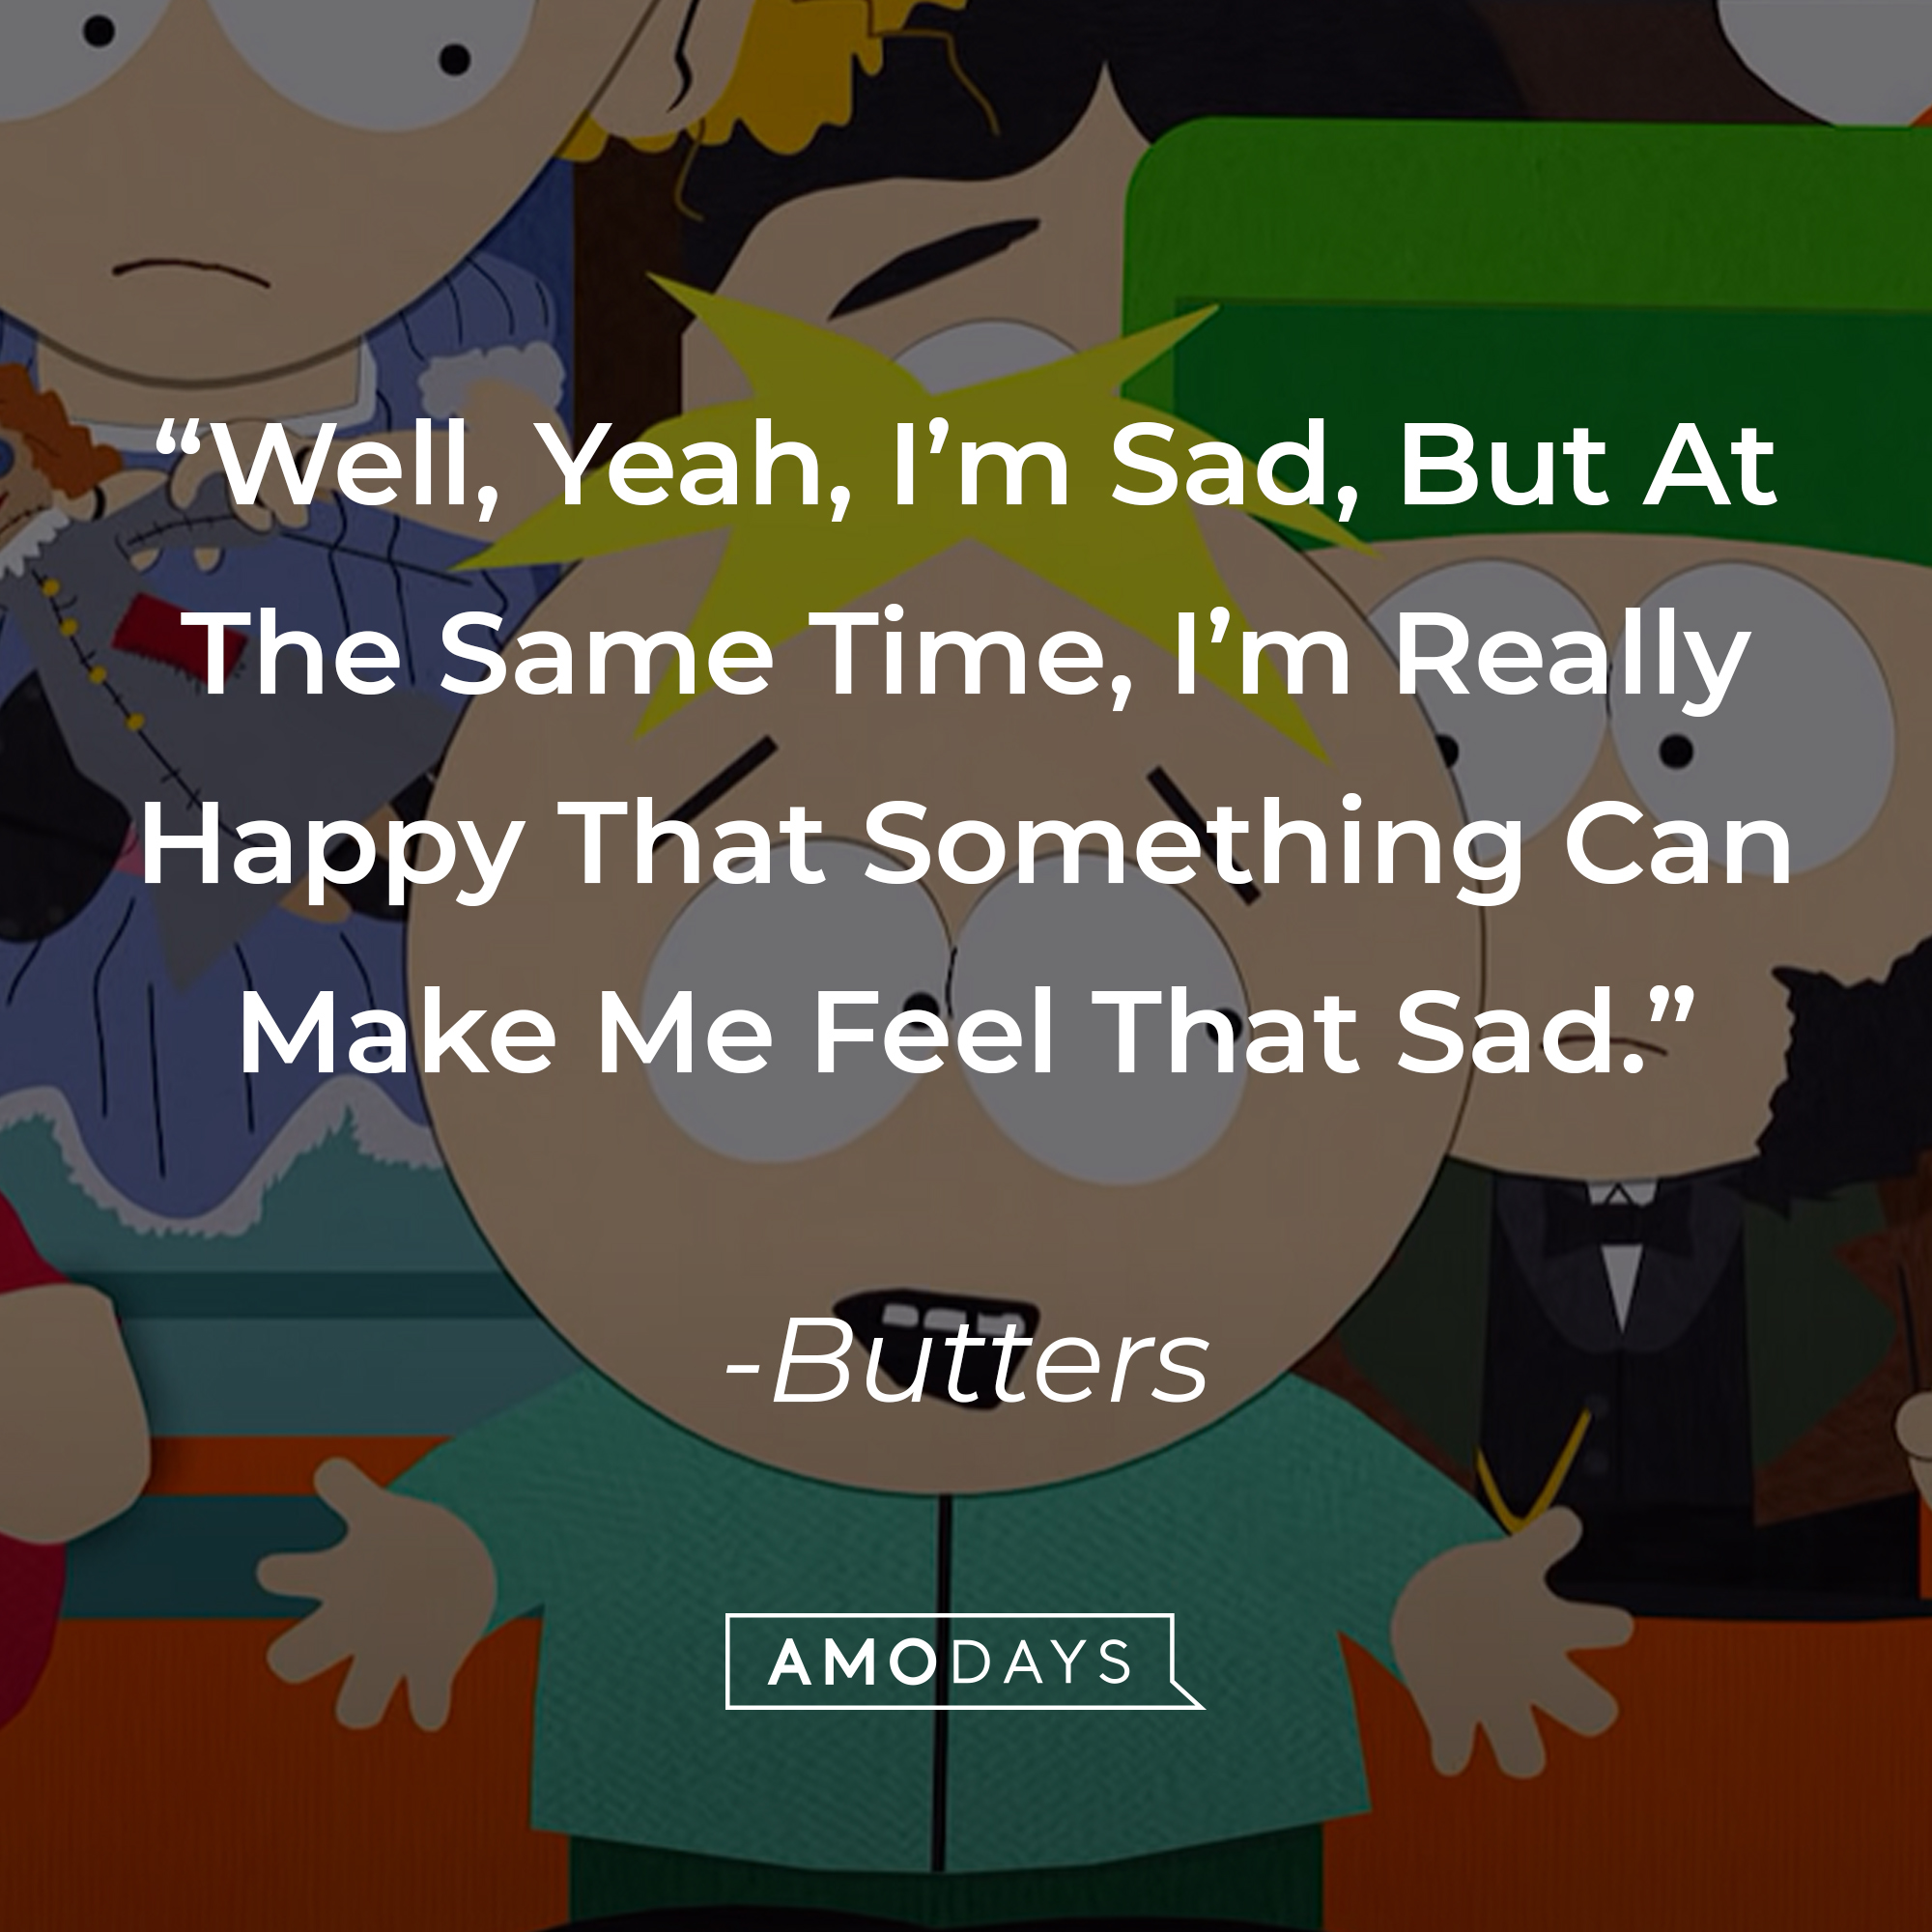 Butters' quote: "Well, Yeah, I'm Sad, But At The Same Time, I'm Really Happy That Something Can Make Me Feel That Sad." | Source: youtube.com/southpark